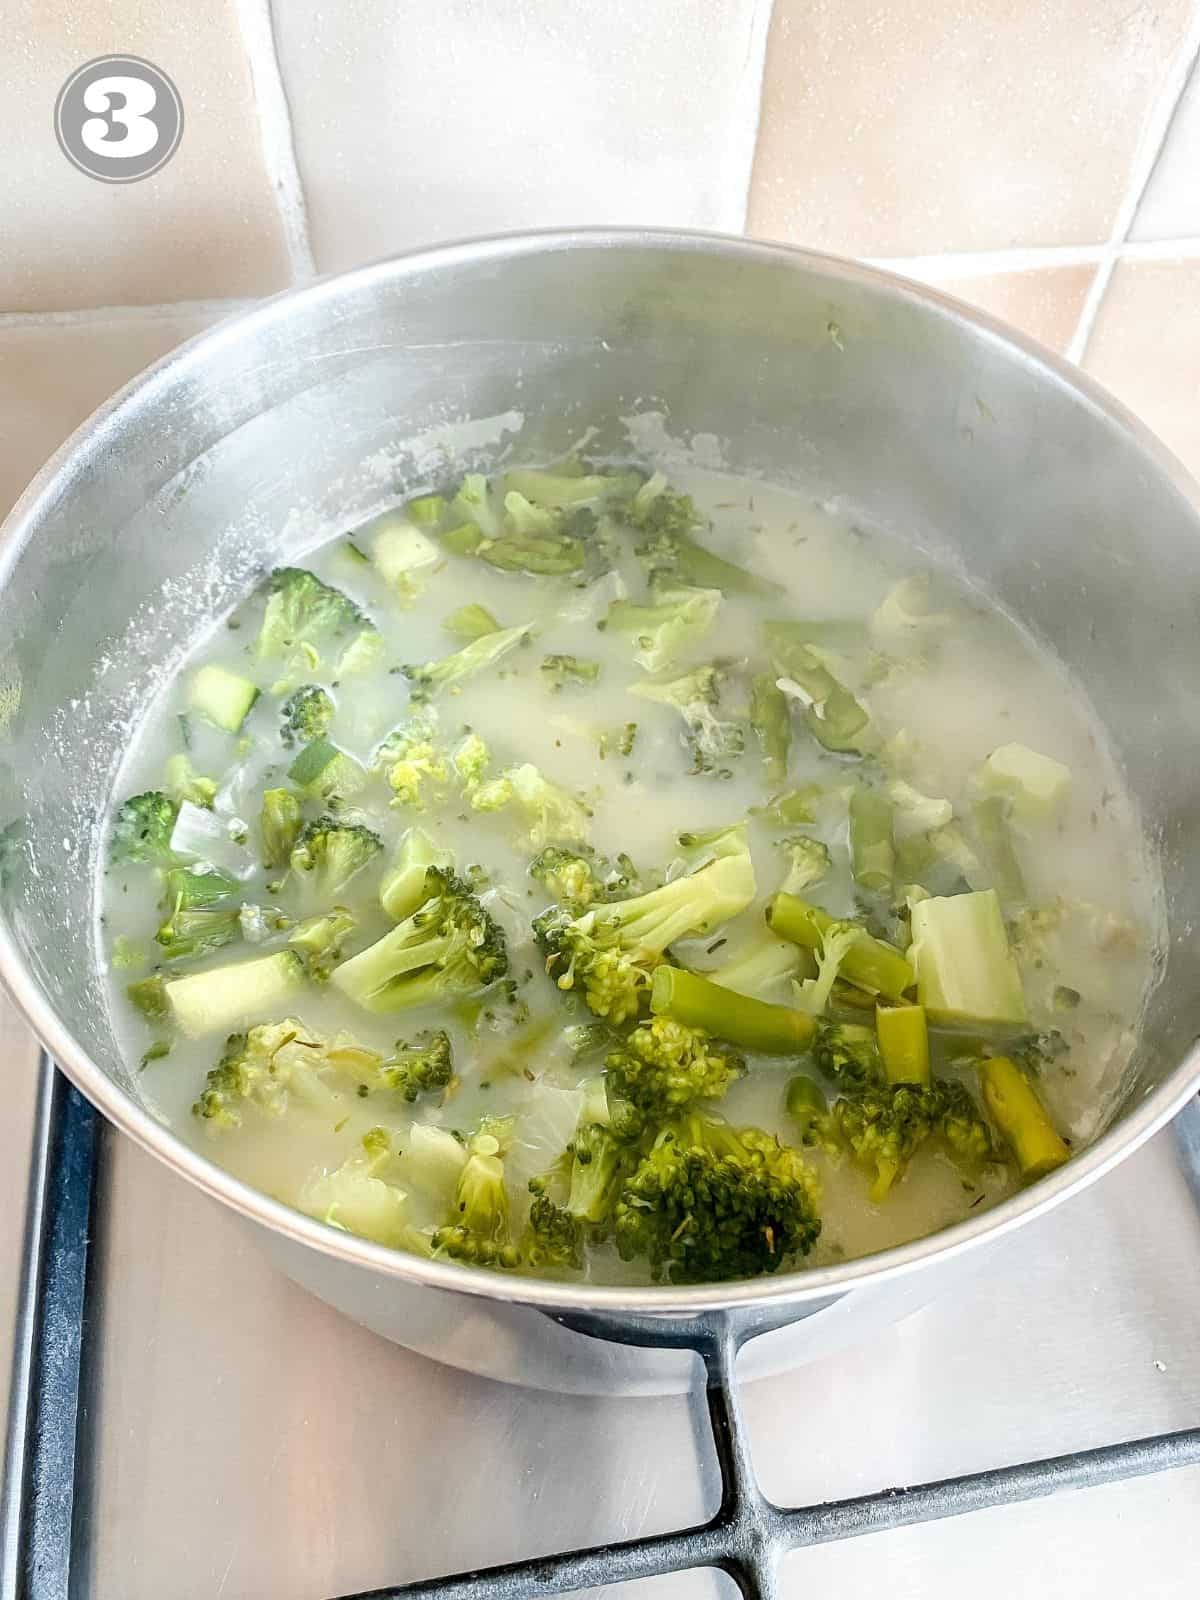 broccoli and asparagus in a saucepan in broth labelled number three.